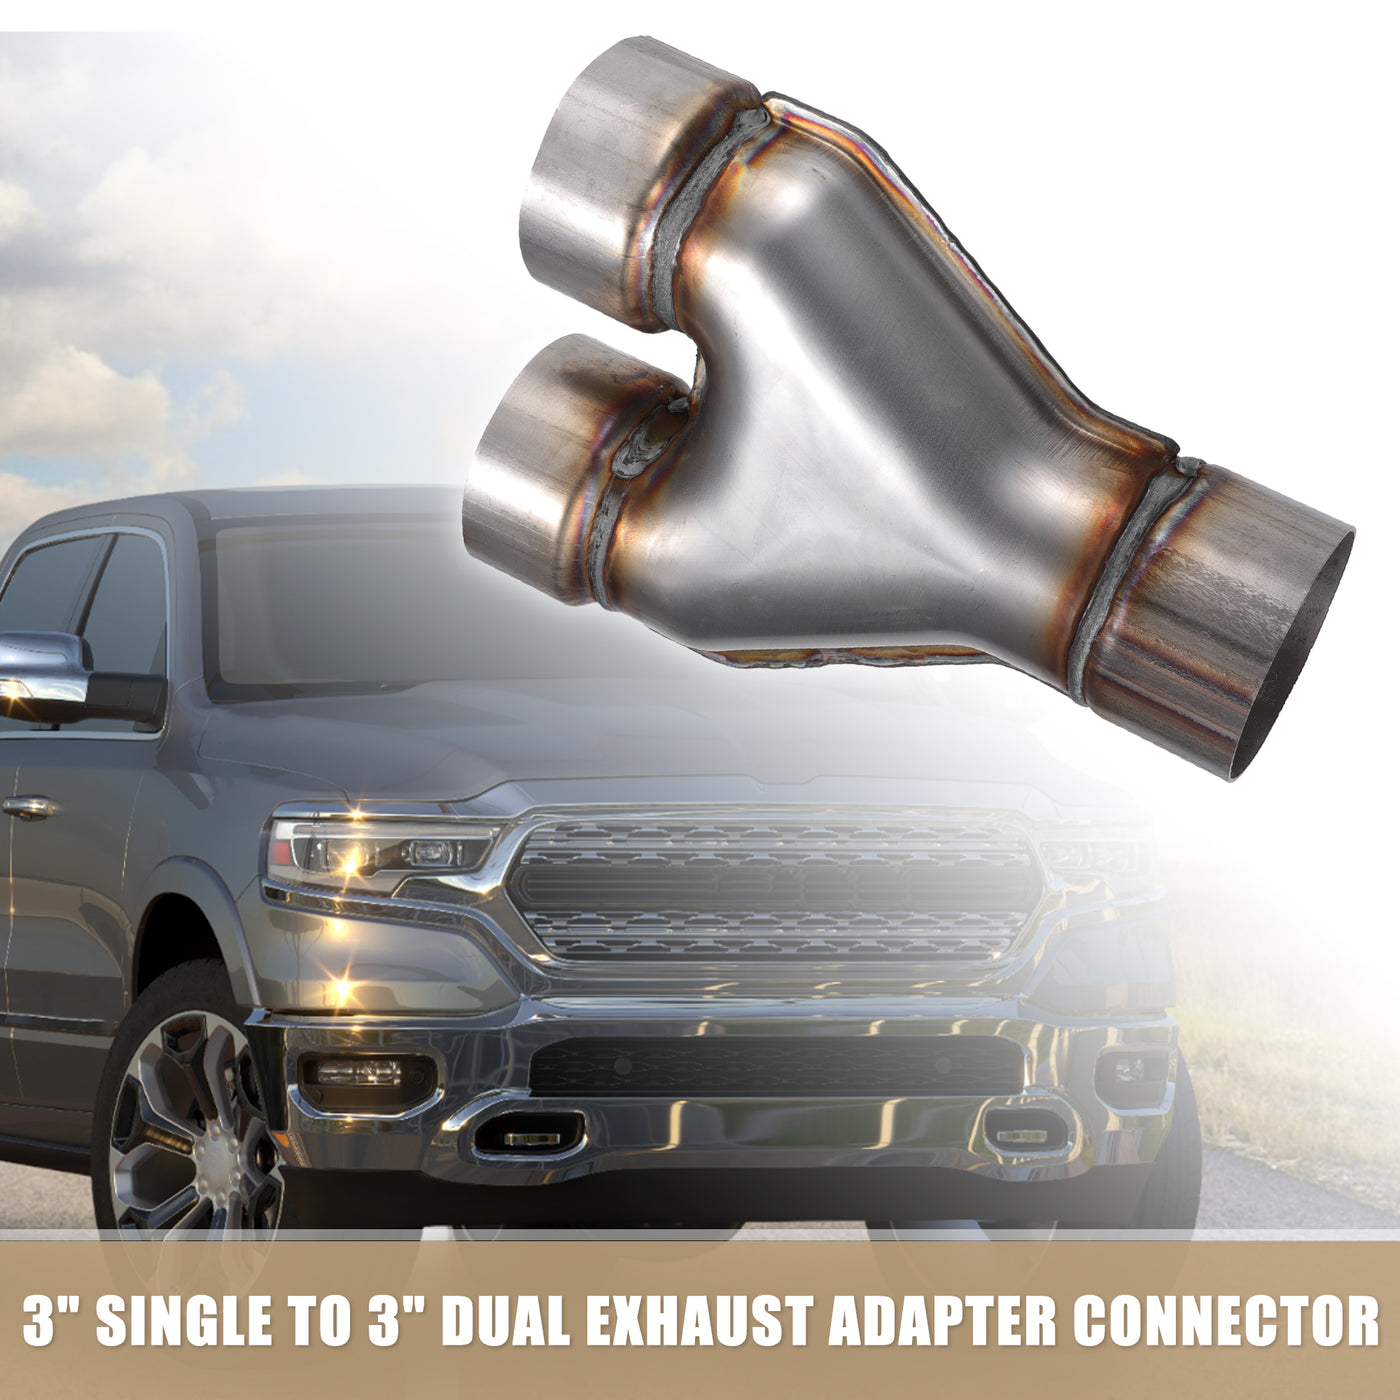 X AUTOHAUX Universal 409 Stainless Steel Exhaust Y Pipe 3" Single to 3" Dual Exhaust Adapter Connector 10" Overall Length for Car Truck